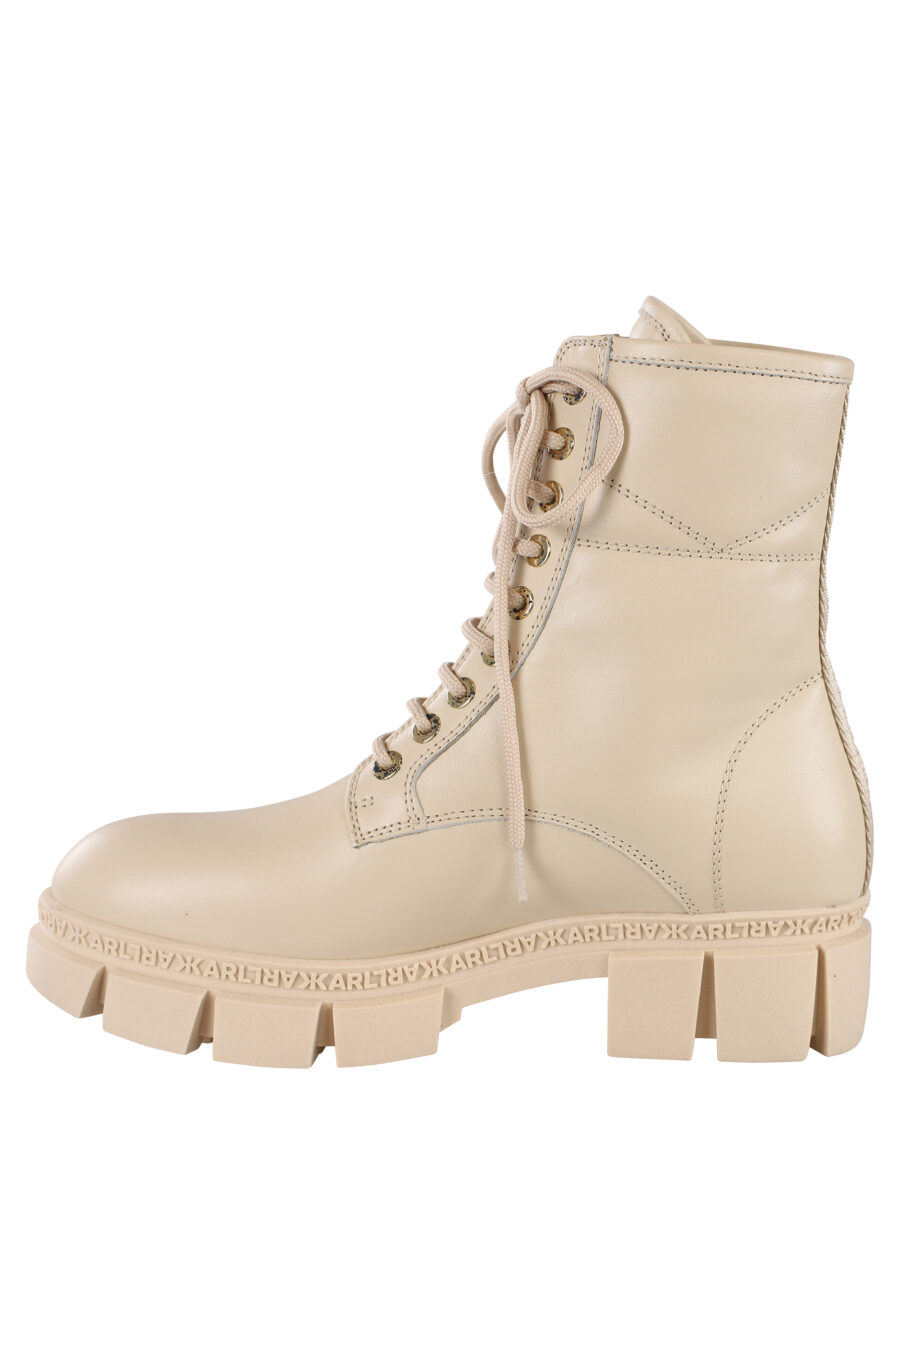 Beige lace-up ankle boots with small gold logo - IMG 6861